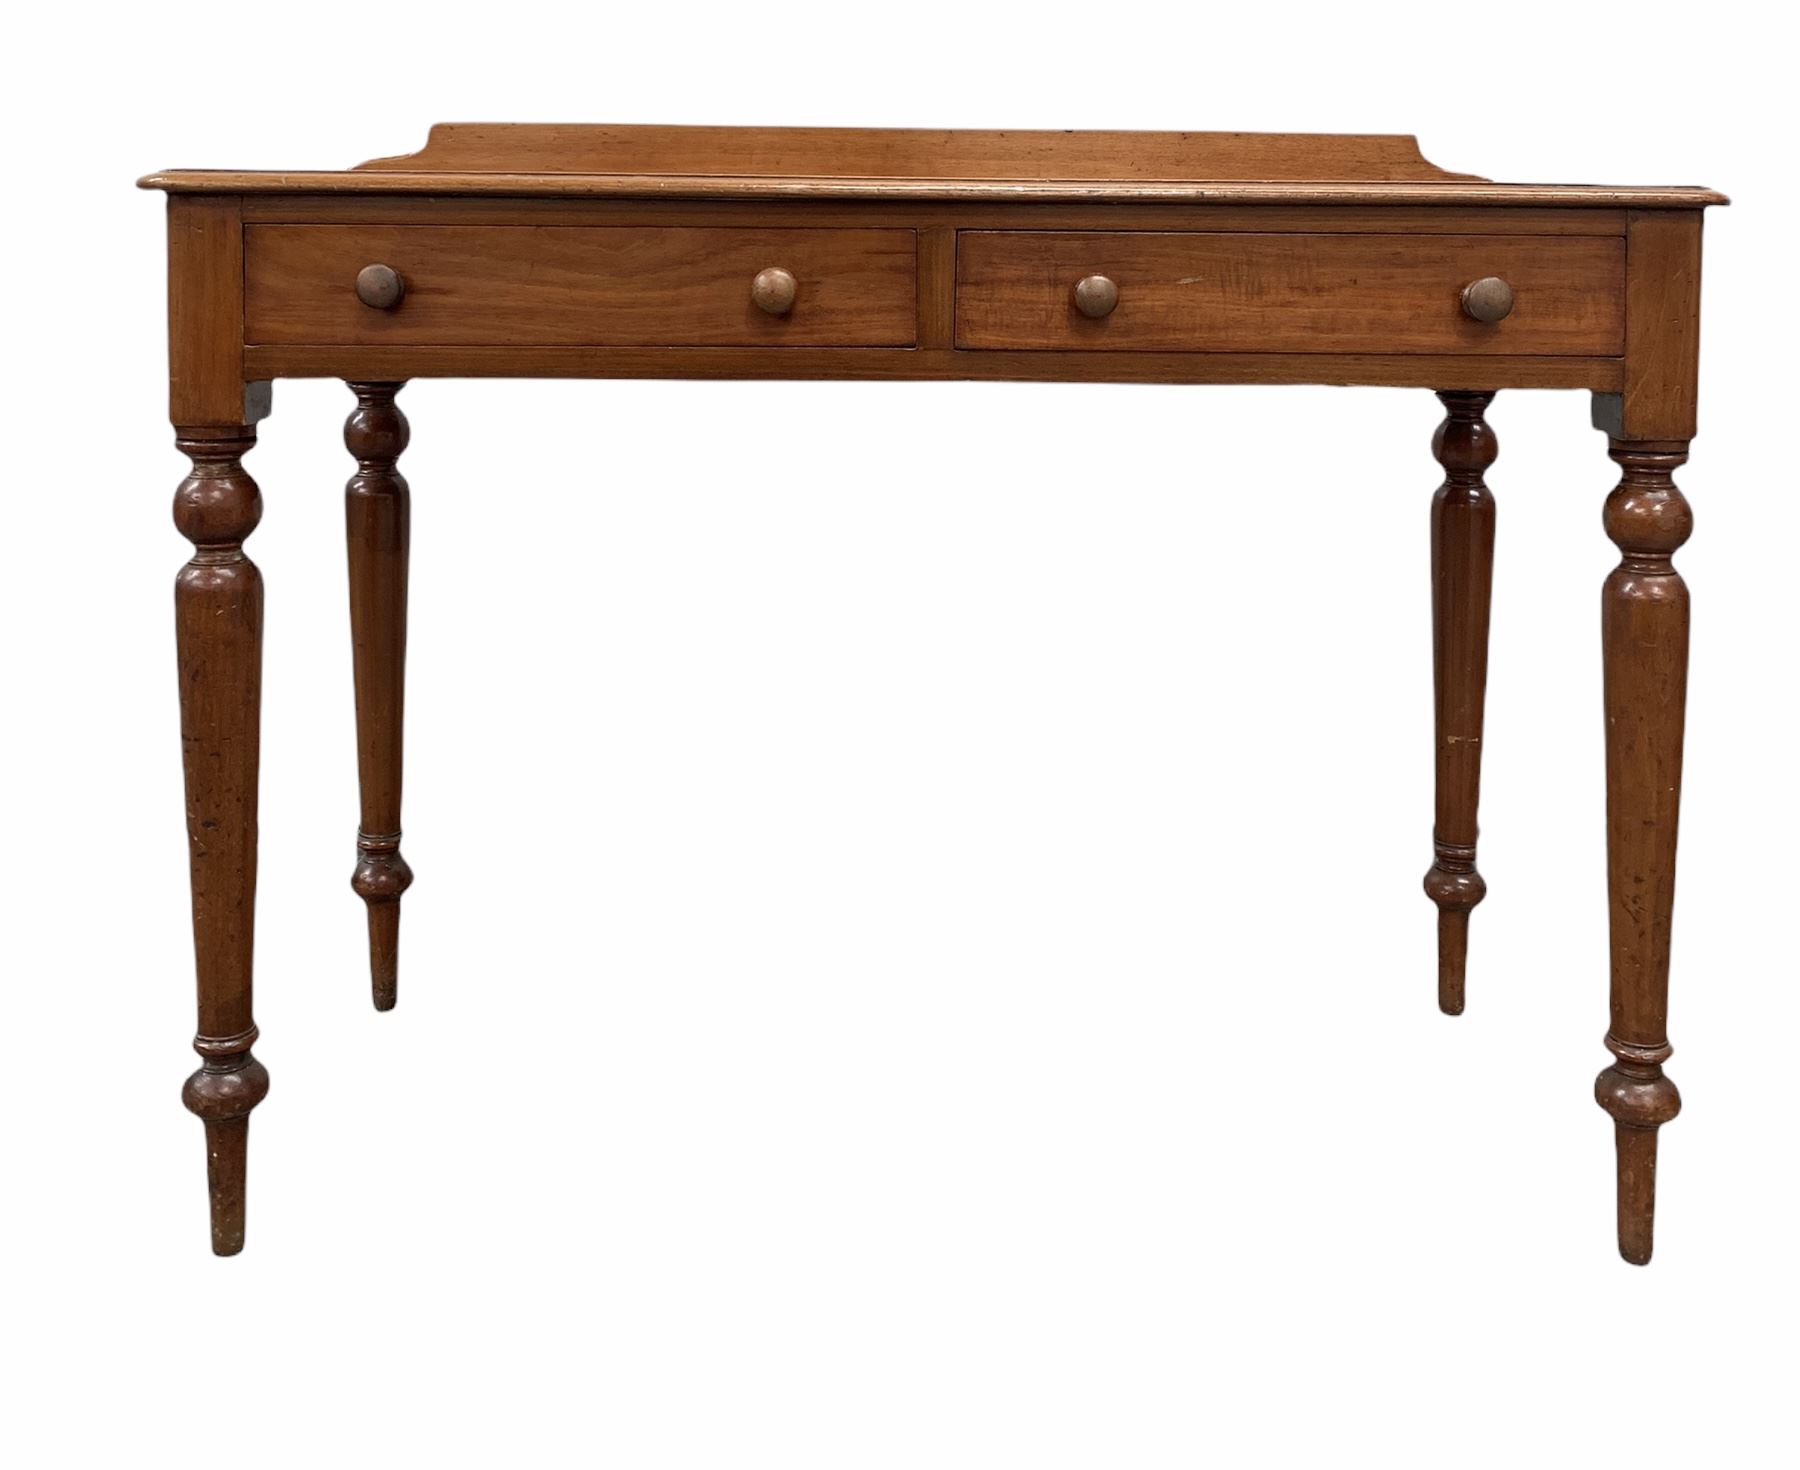 Victorian mahogany side table - Image 2 of 2